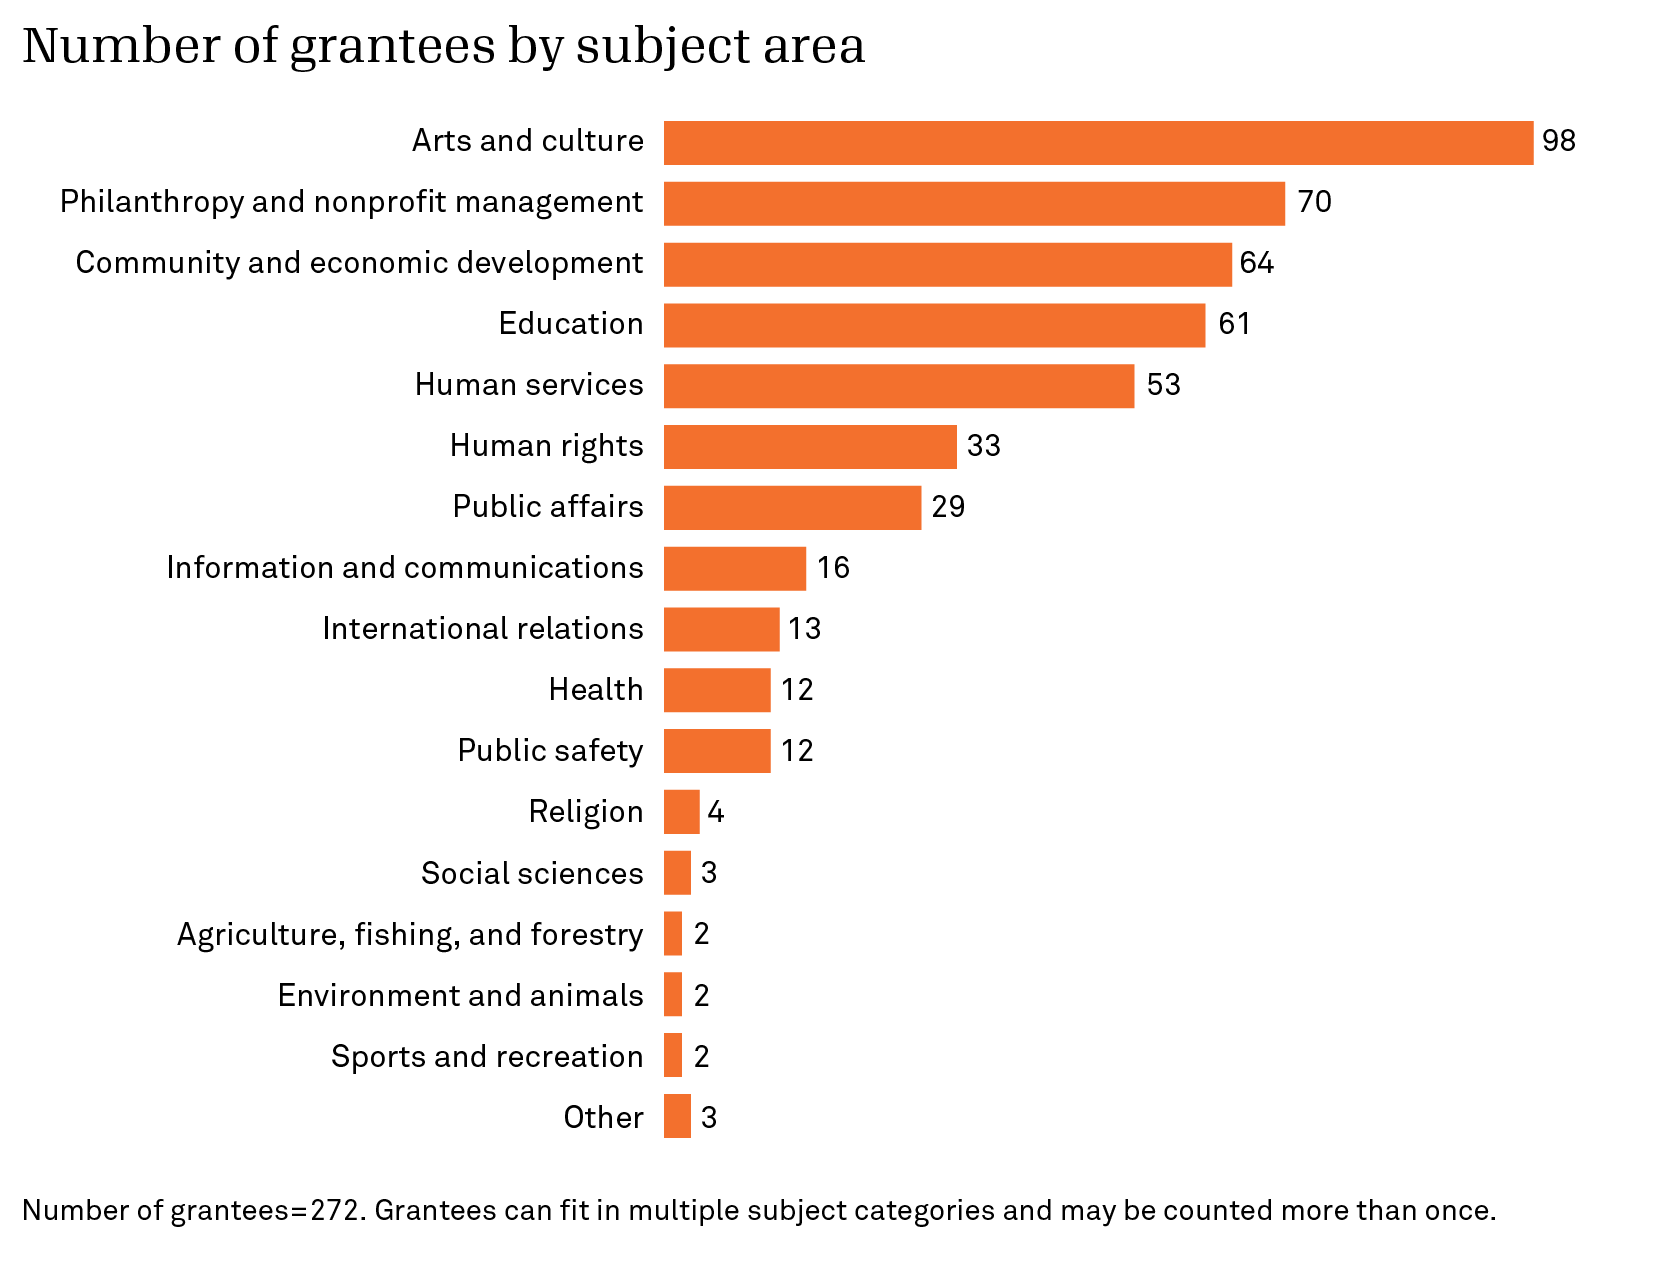 Chart showing the number of grantees by subject area n=272